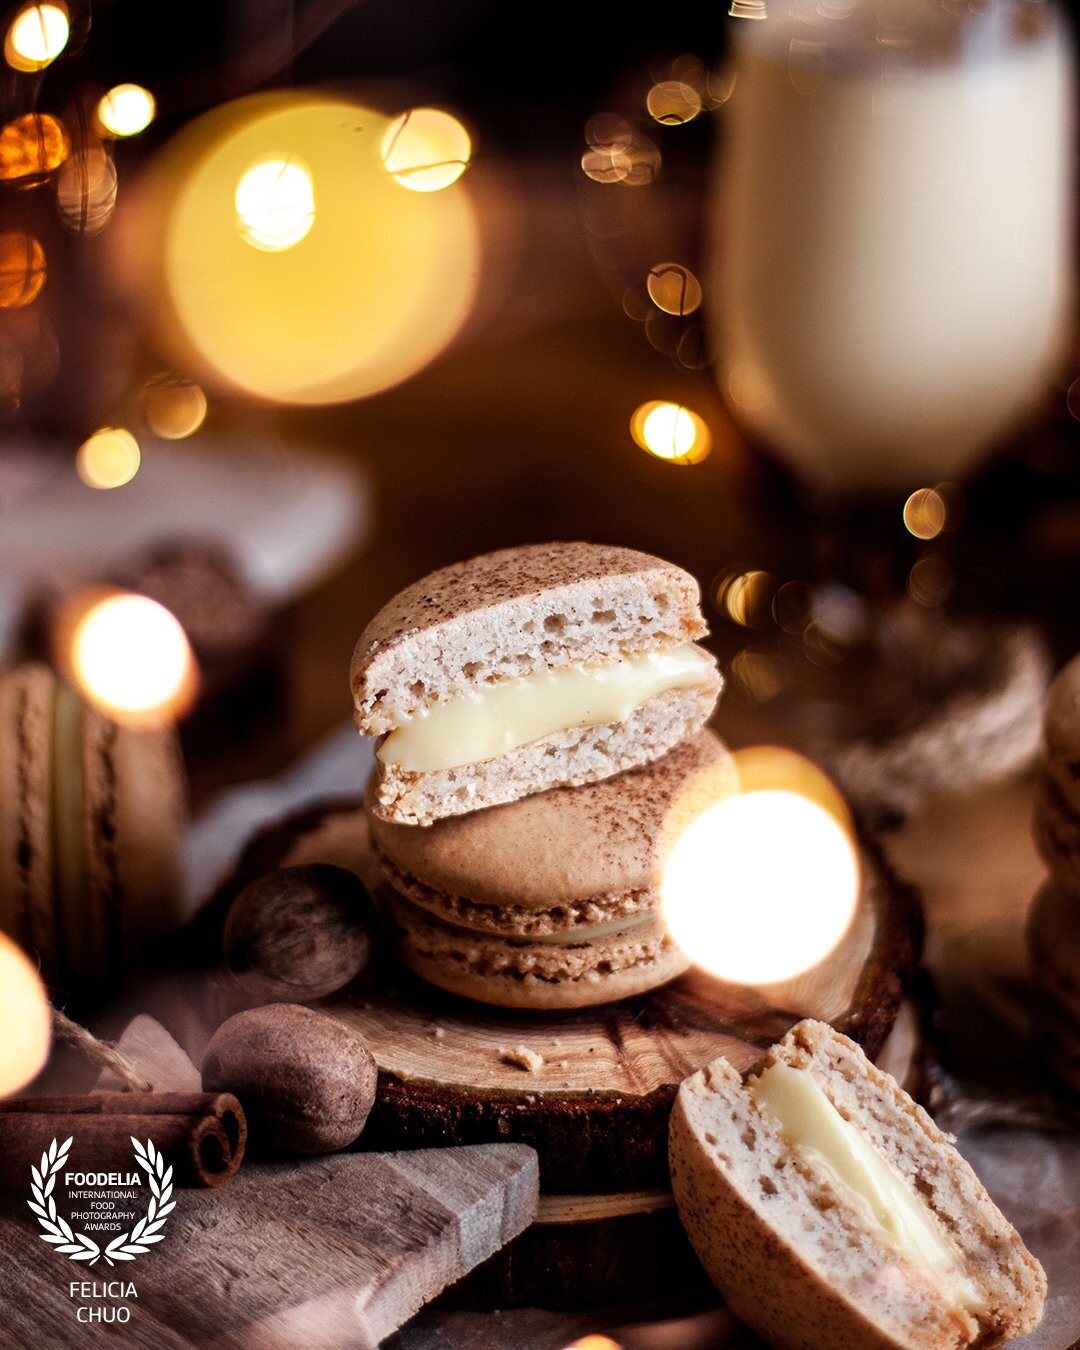 Eggnog macarons made and shot for the festive season, as hinted by the fairy lights, spices, and subtle wooden decoration peeking at the front. Shot with natural light.